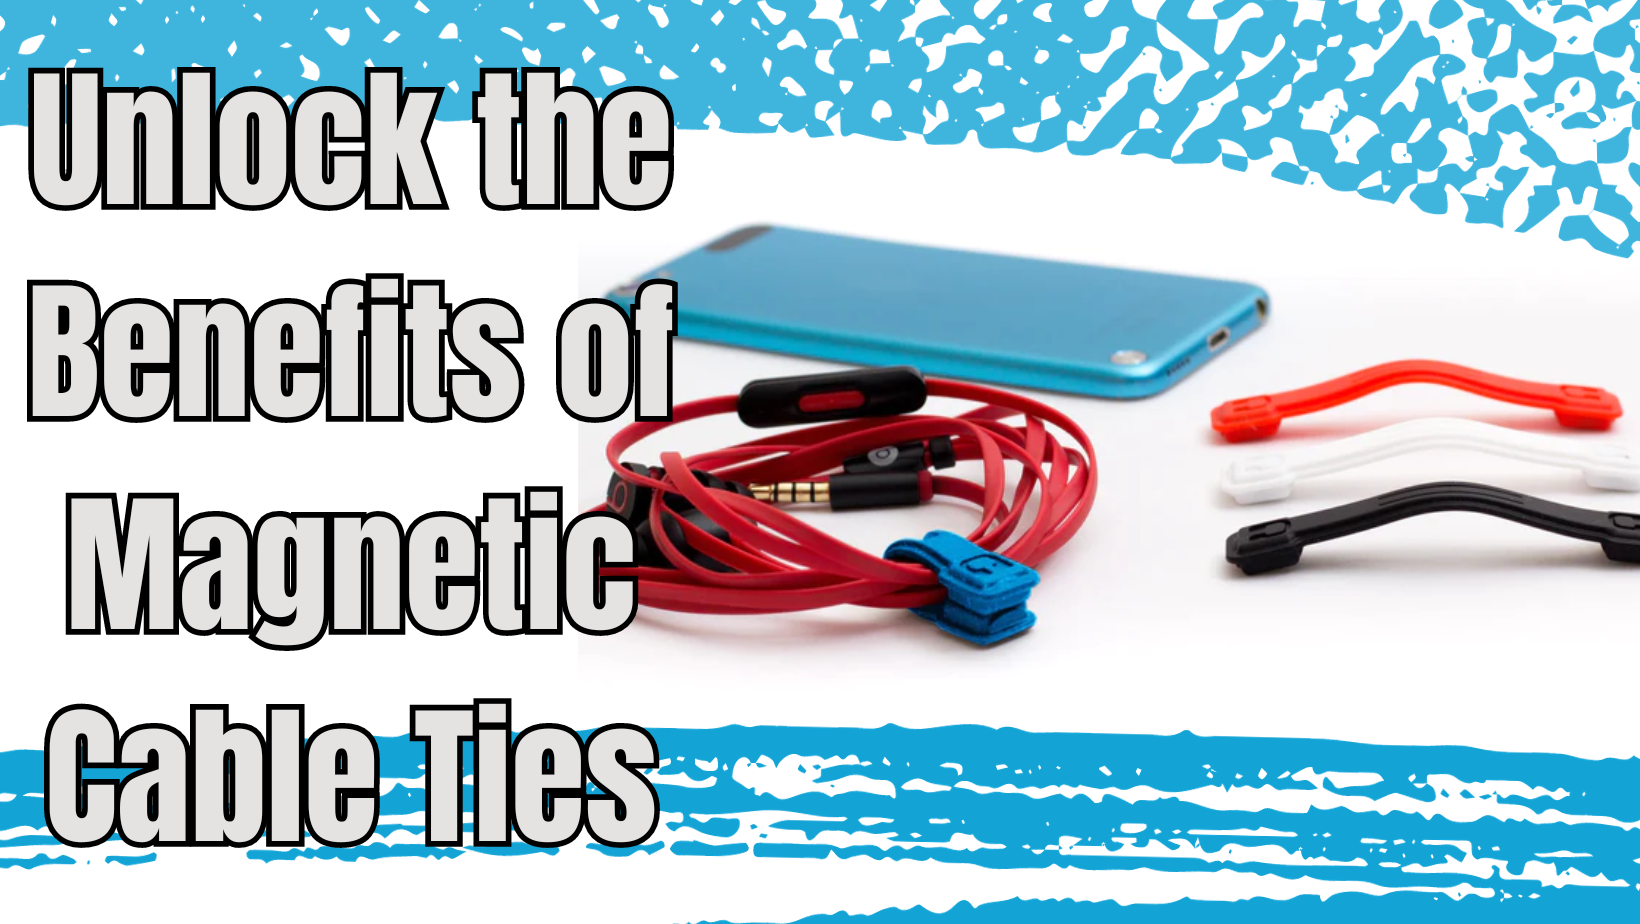 Magnetic cable ties benefits: Goodbye to tangled cords